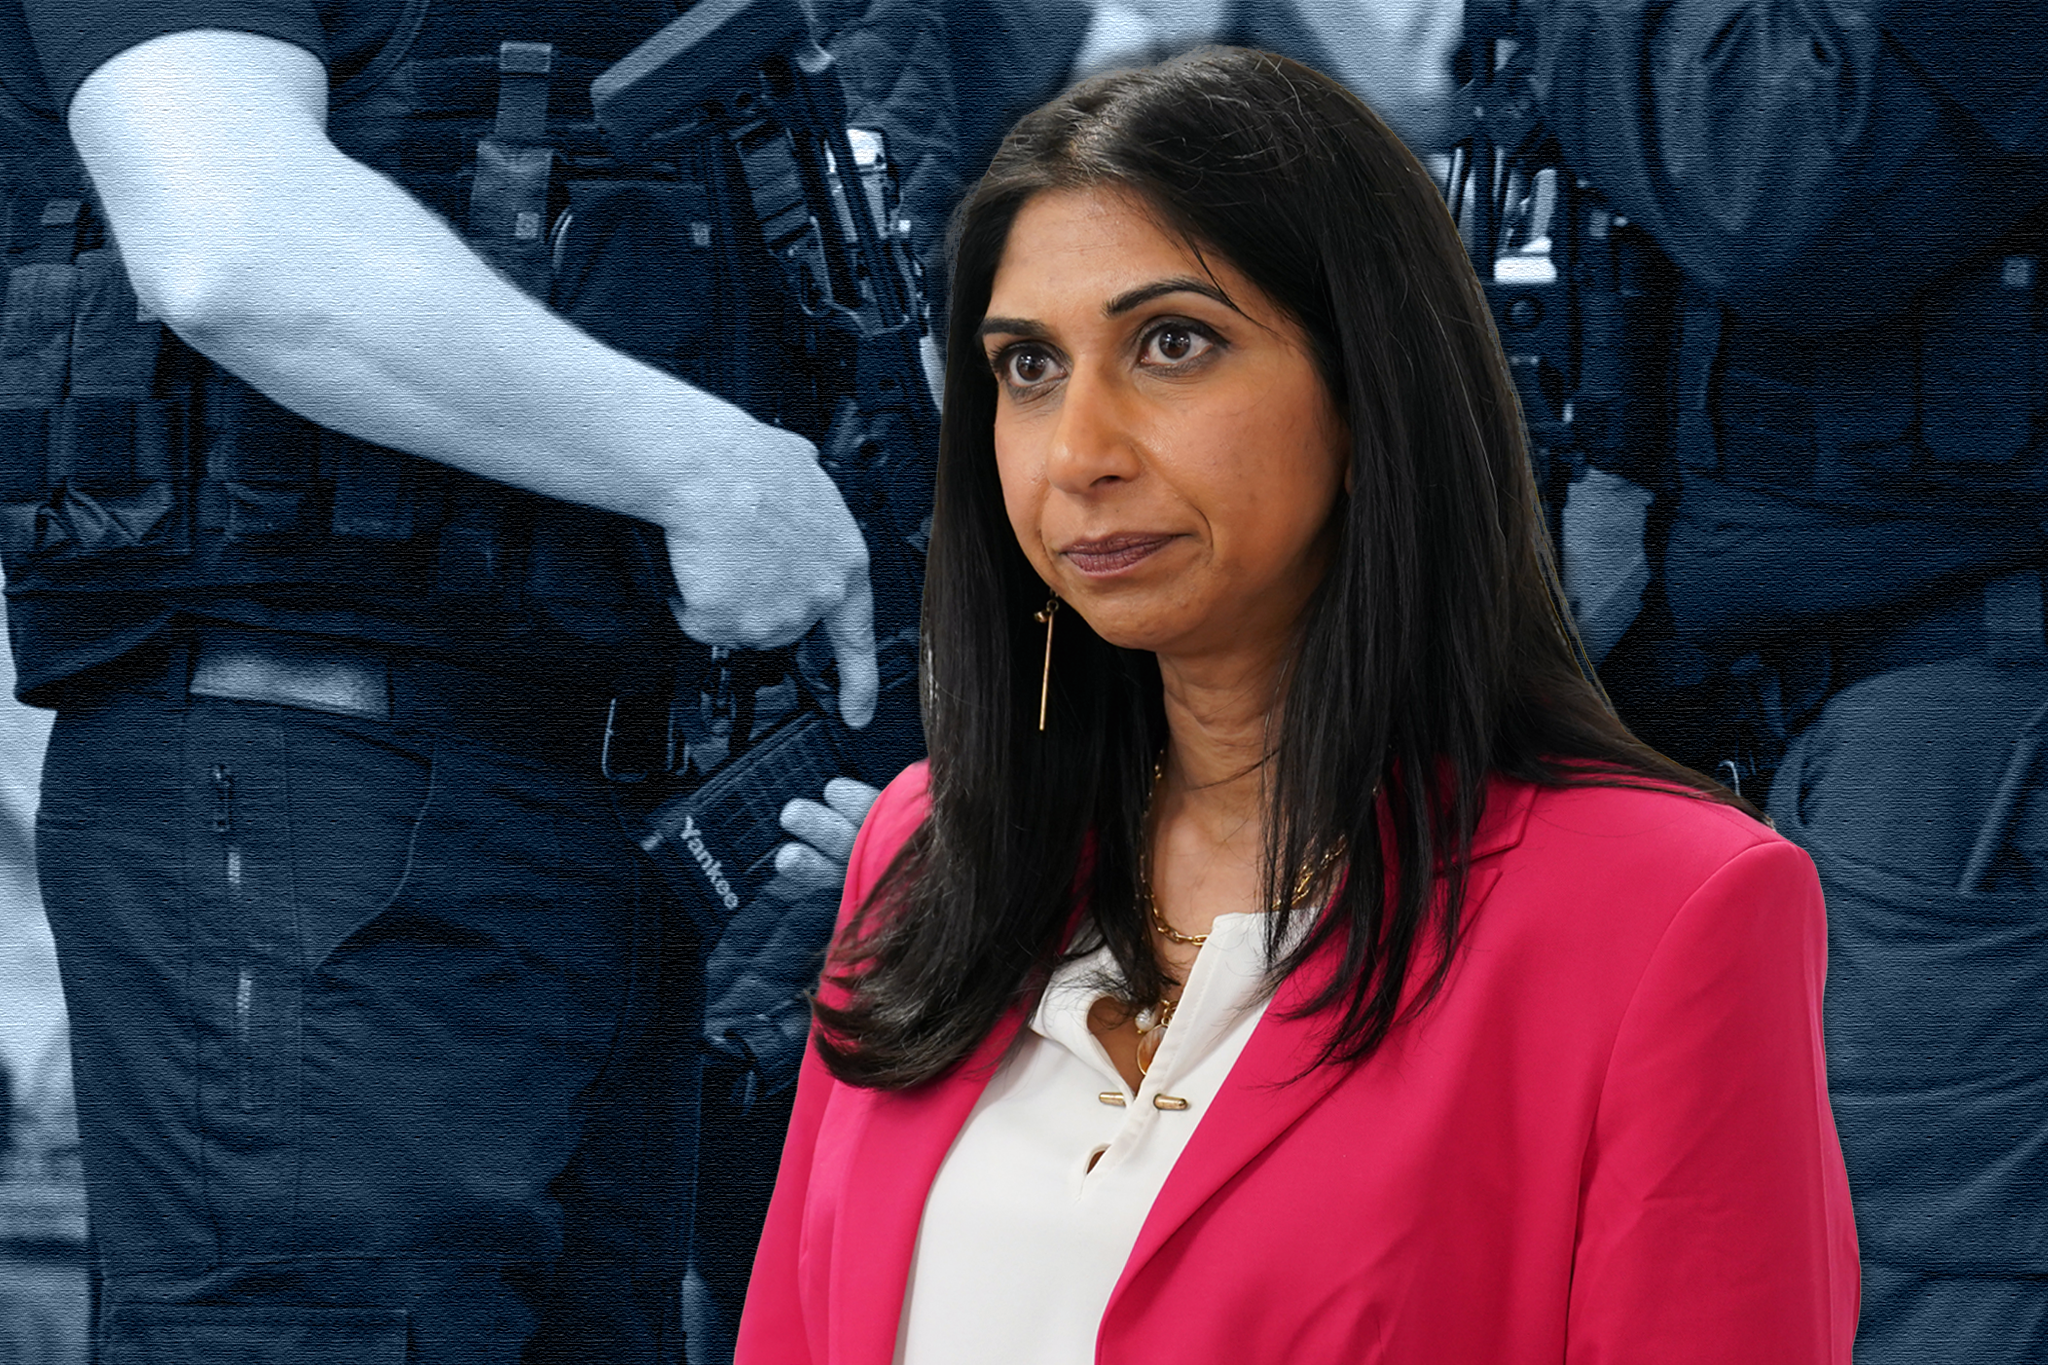 Home Secretary Suella Braverman has announced a review of armed policing